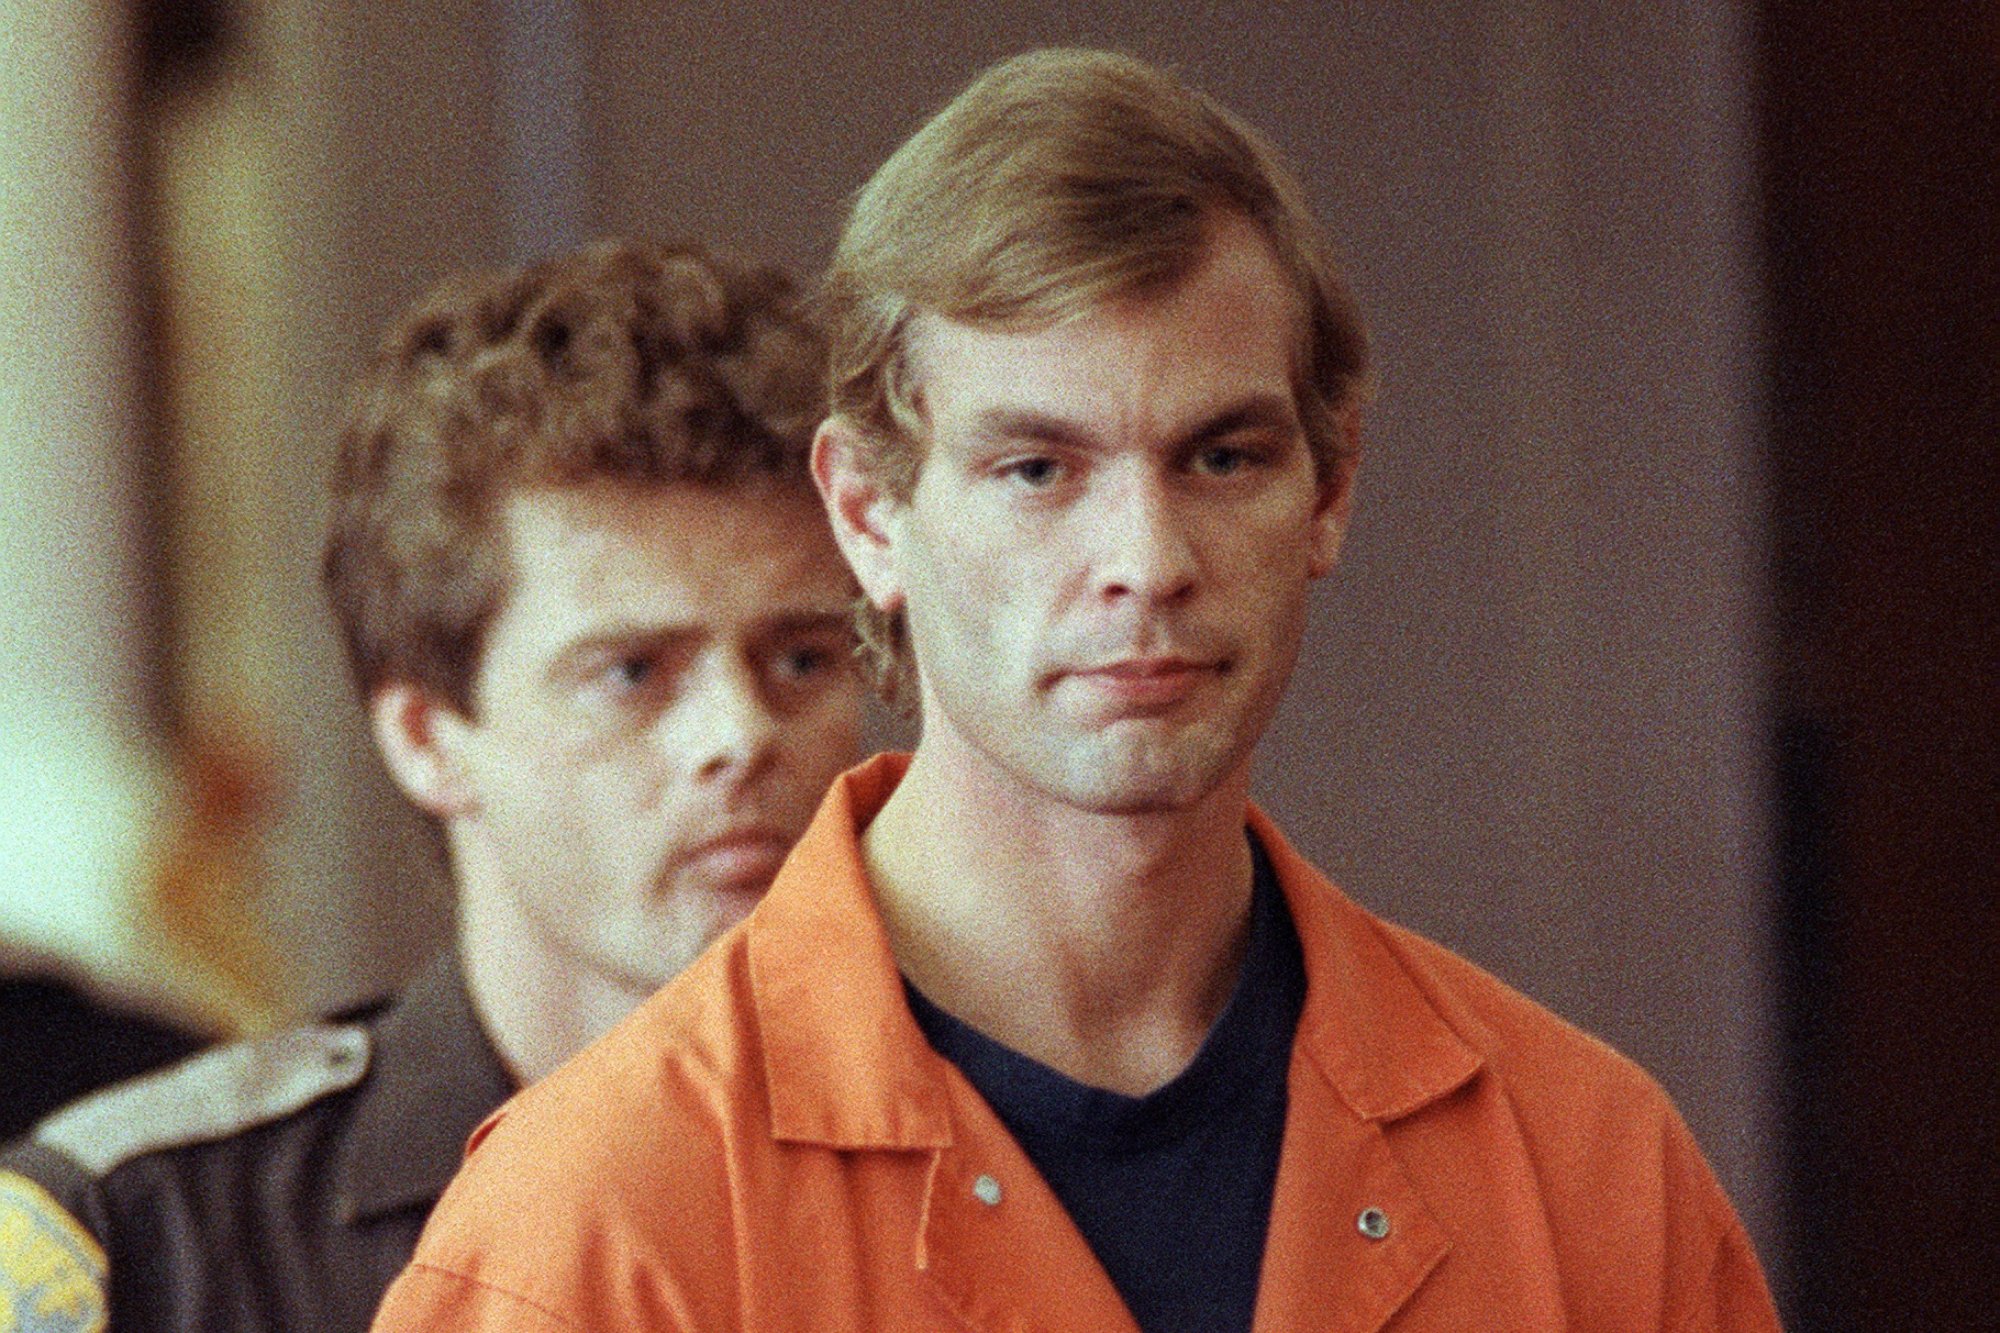 'The Jeffrey Dahmer Tapes' release date revealed.  He is wearing an orange prison jumpsuit with a serious look on his face and a security guard standing behind him.